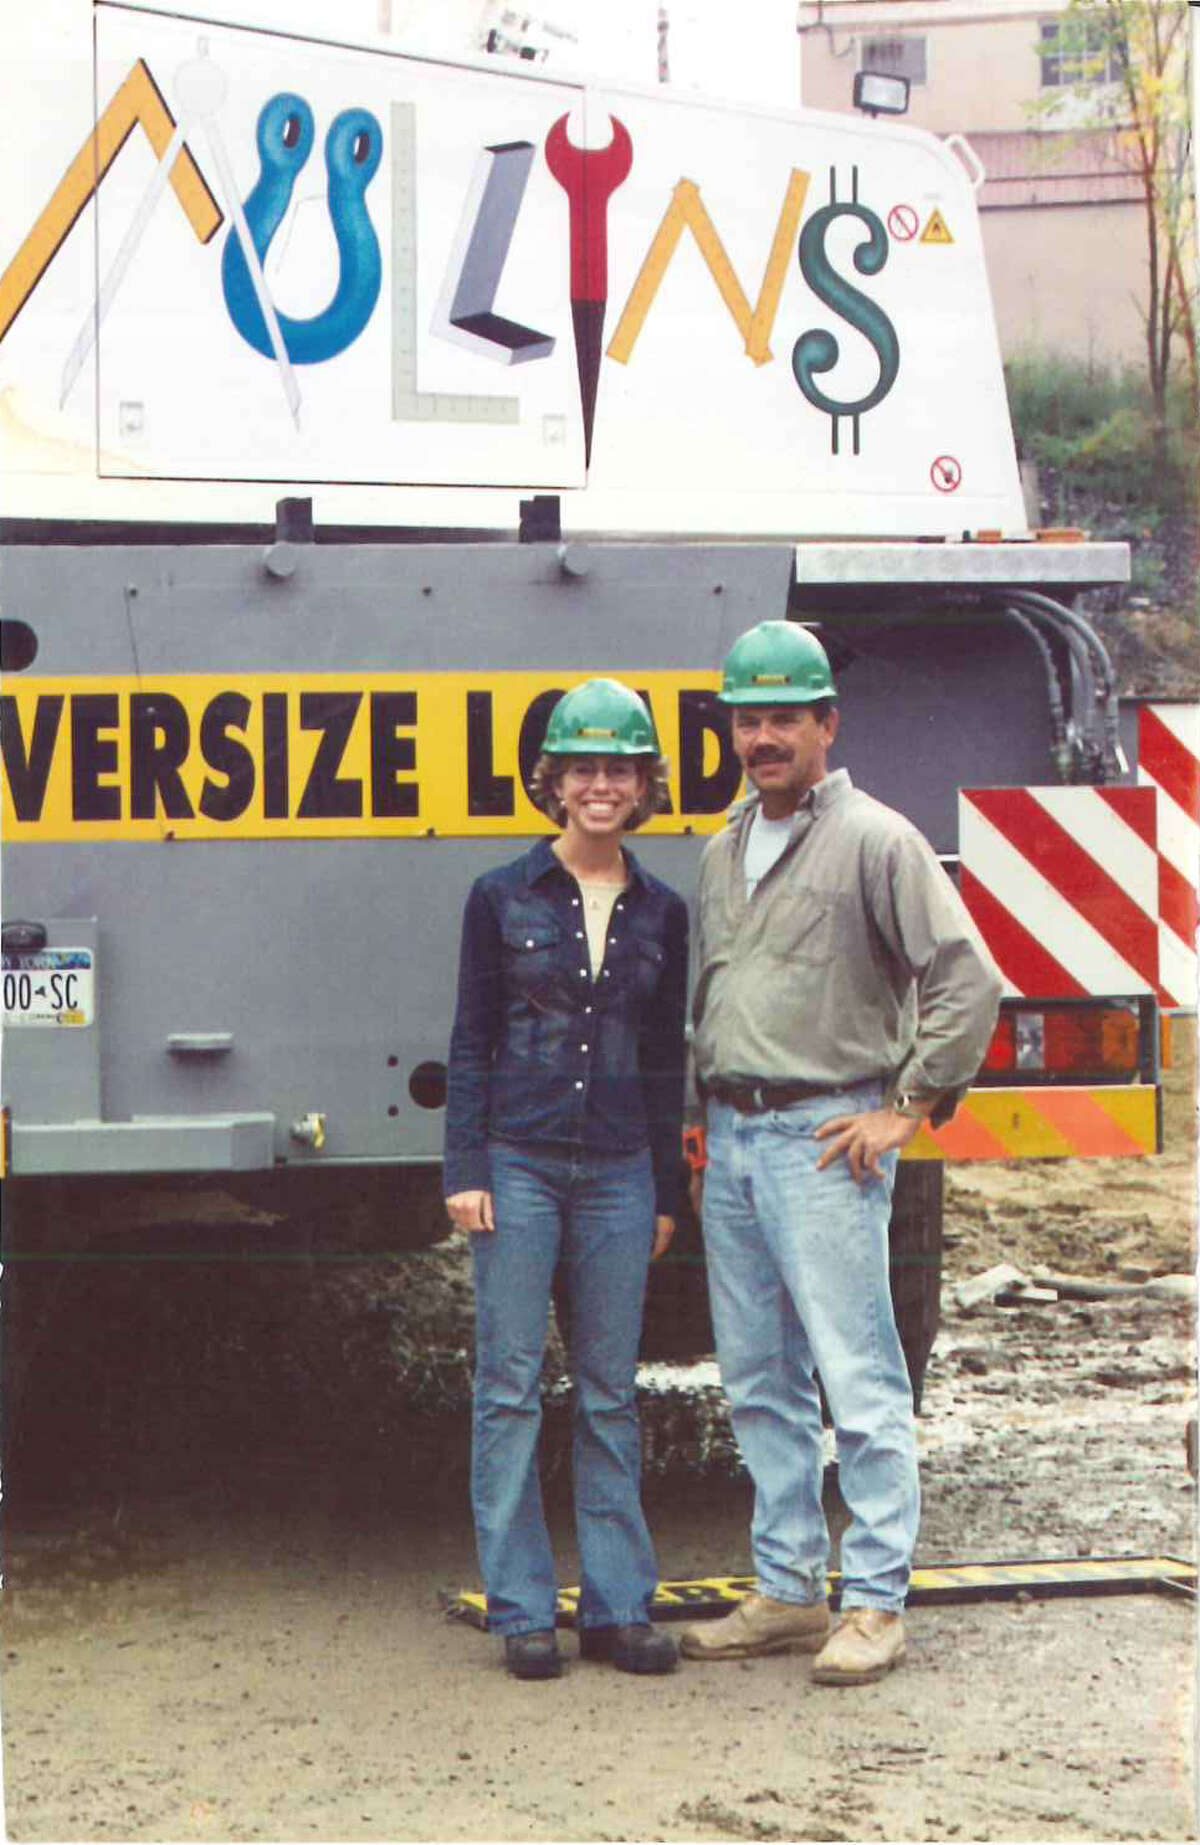 Stefanie Wiley with her father, the former owner of the business. (Courtesy Stefanie Wiley)